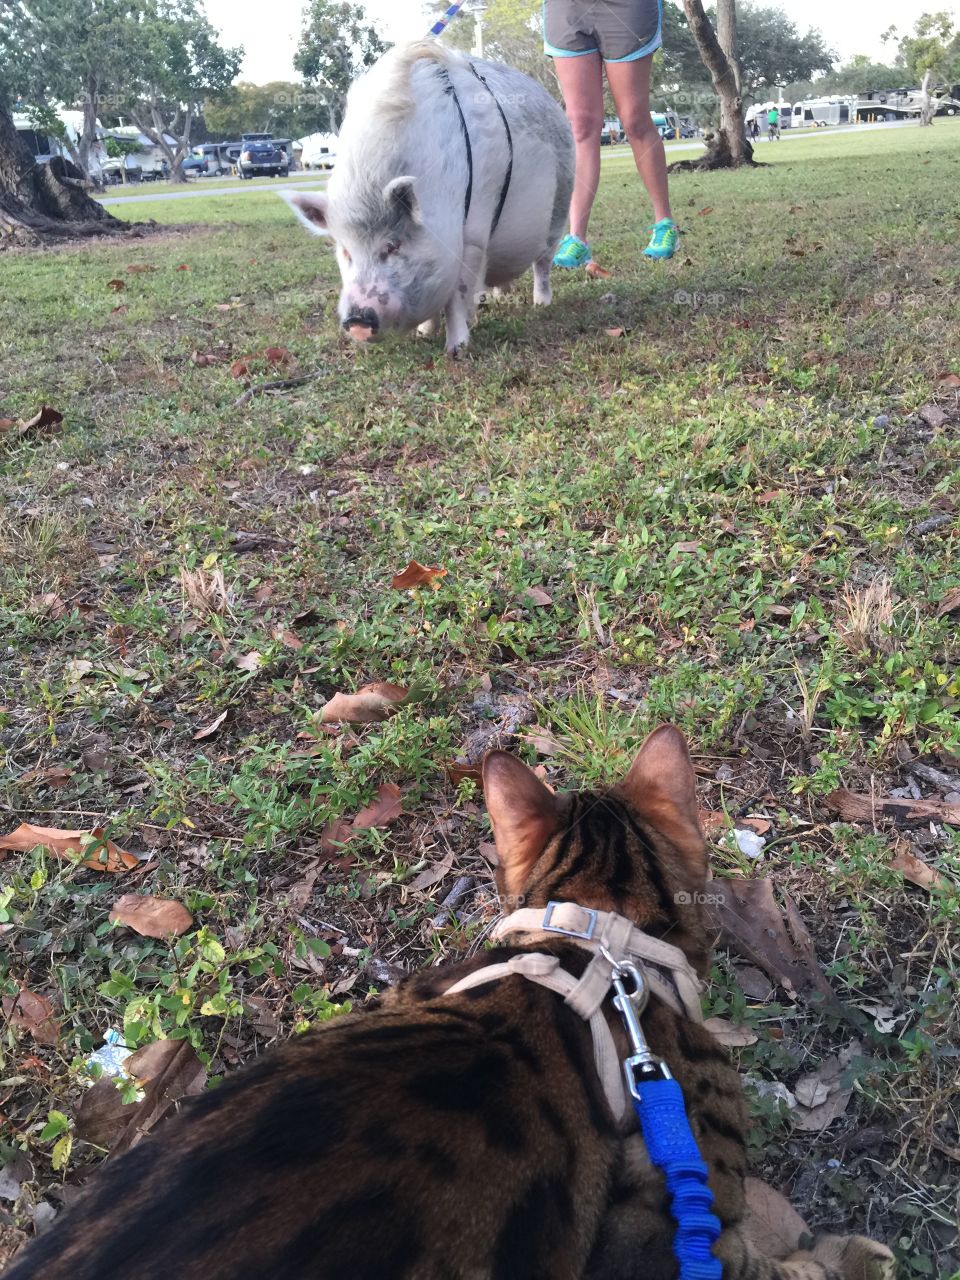 Two unlikely pets on a walk meet each other. 